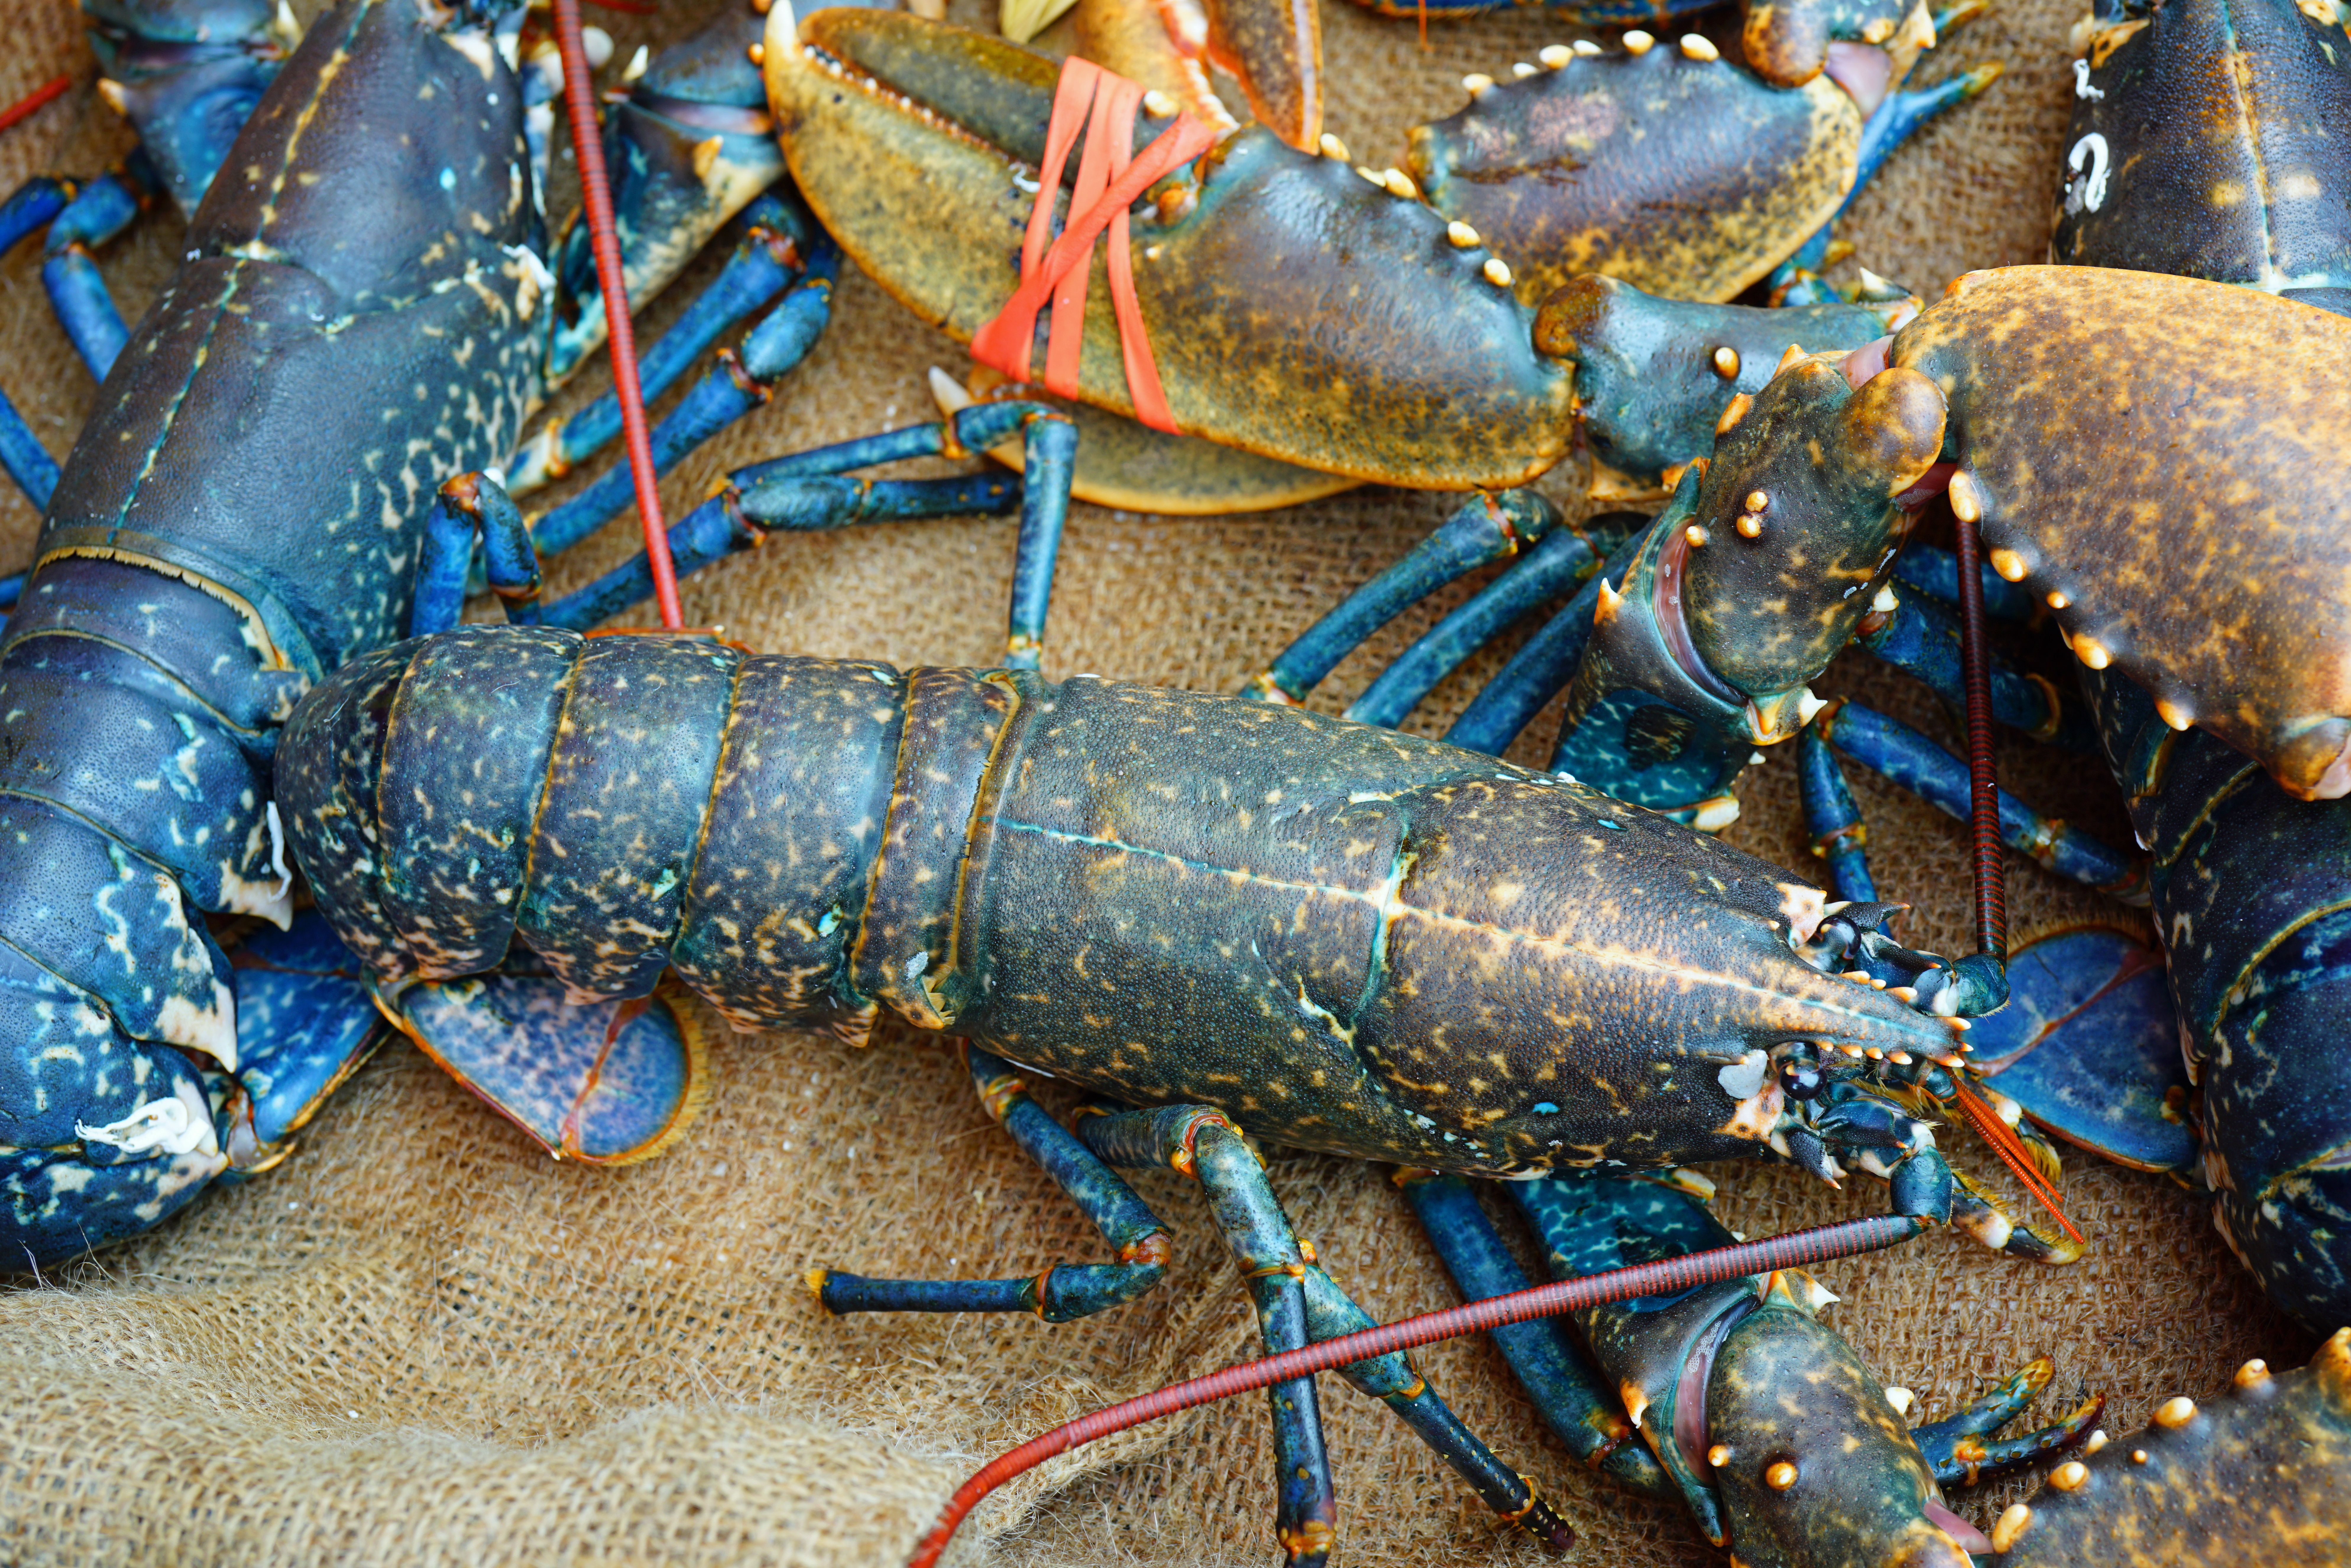 where to buy lobster | wholesale maine lobster